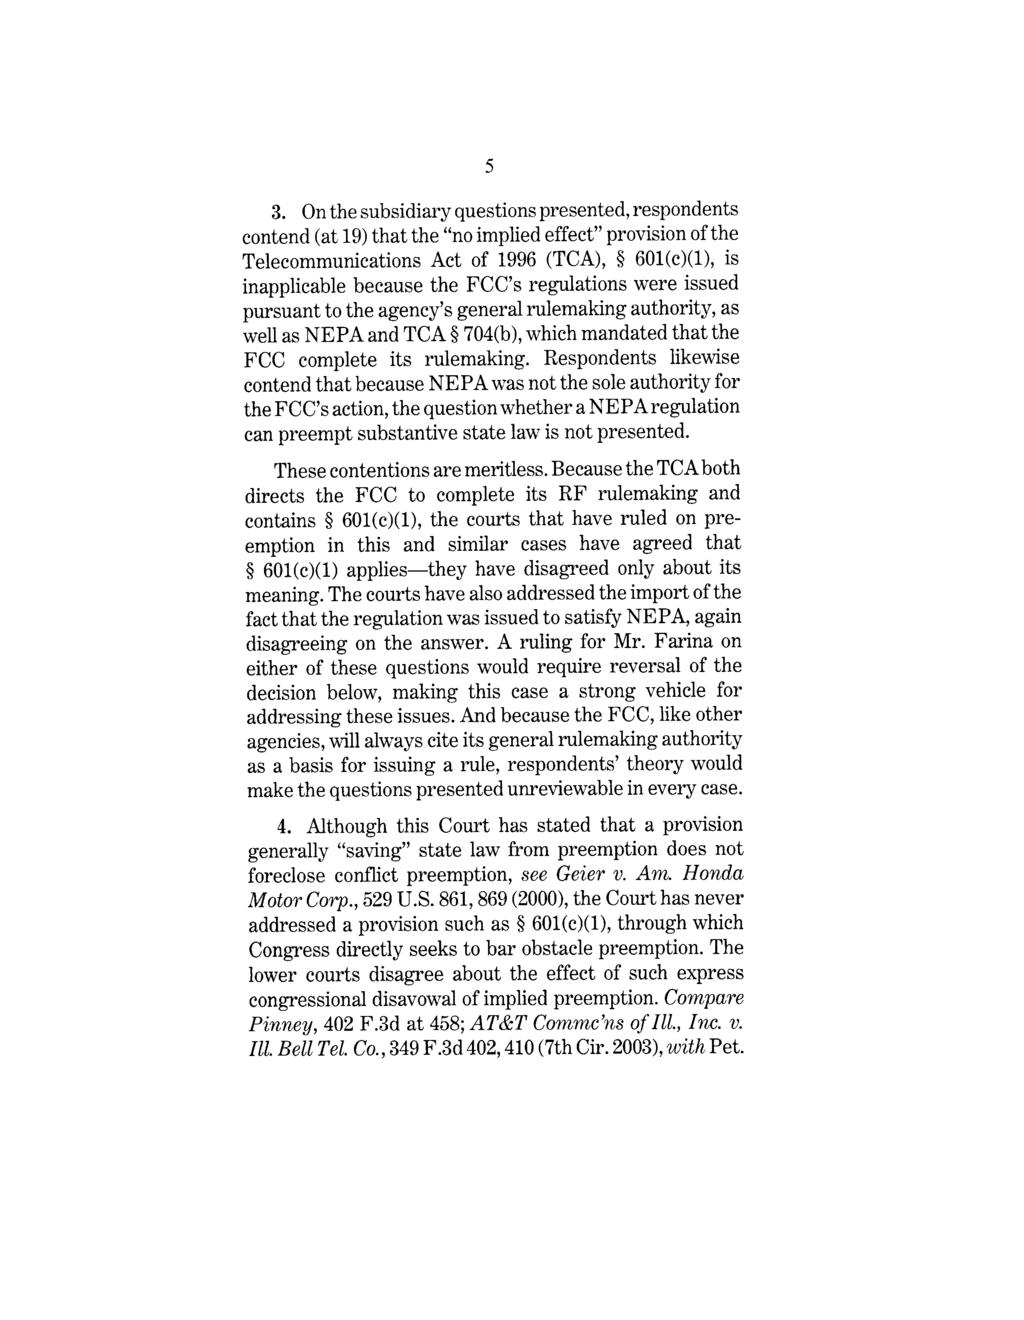 3. On the subsidiary questions presented, respondents contend (at 19) that the "no implied effect" provision of the Telecommunications Act of 1996 (TCA), 601(c)(1), is inapplicable because the FCC s